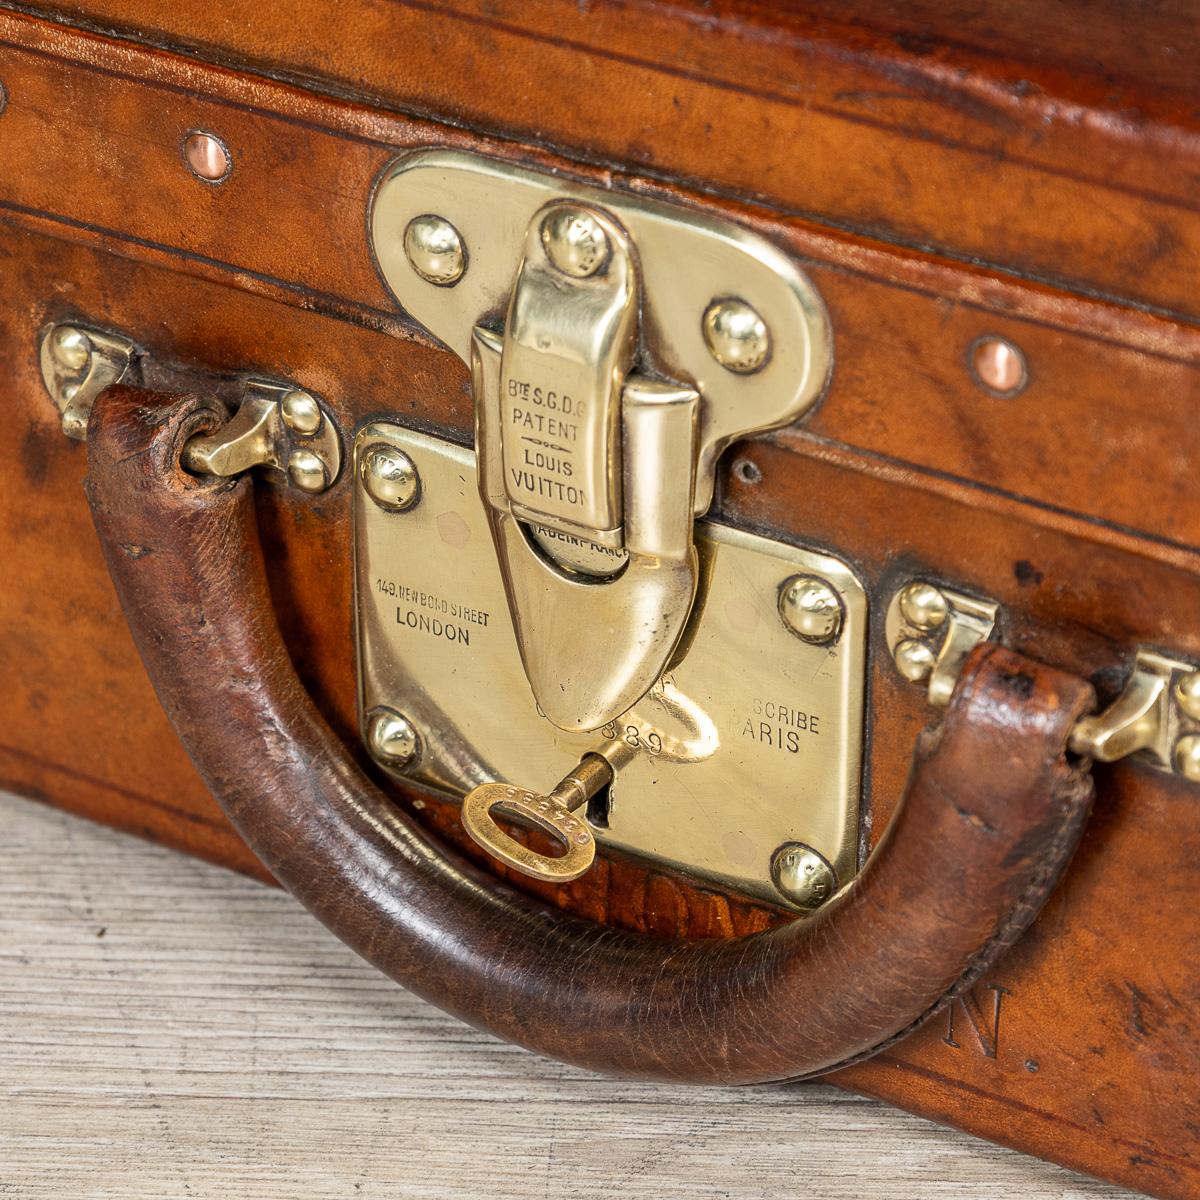 20th Century Louis Vuitton Suitcase In Natural Cow Hide, France c.1910 For Sale 8